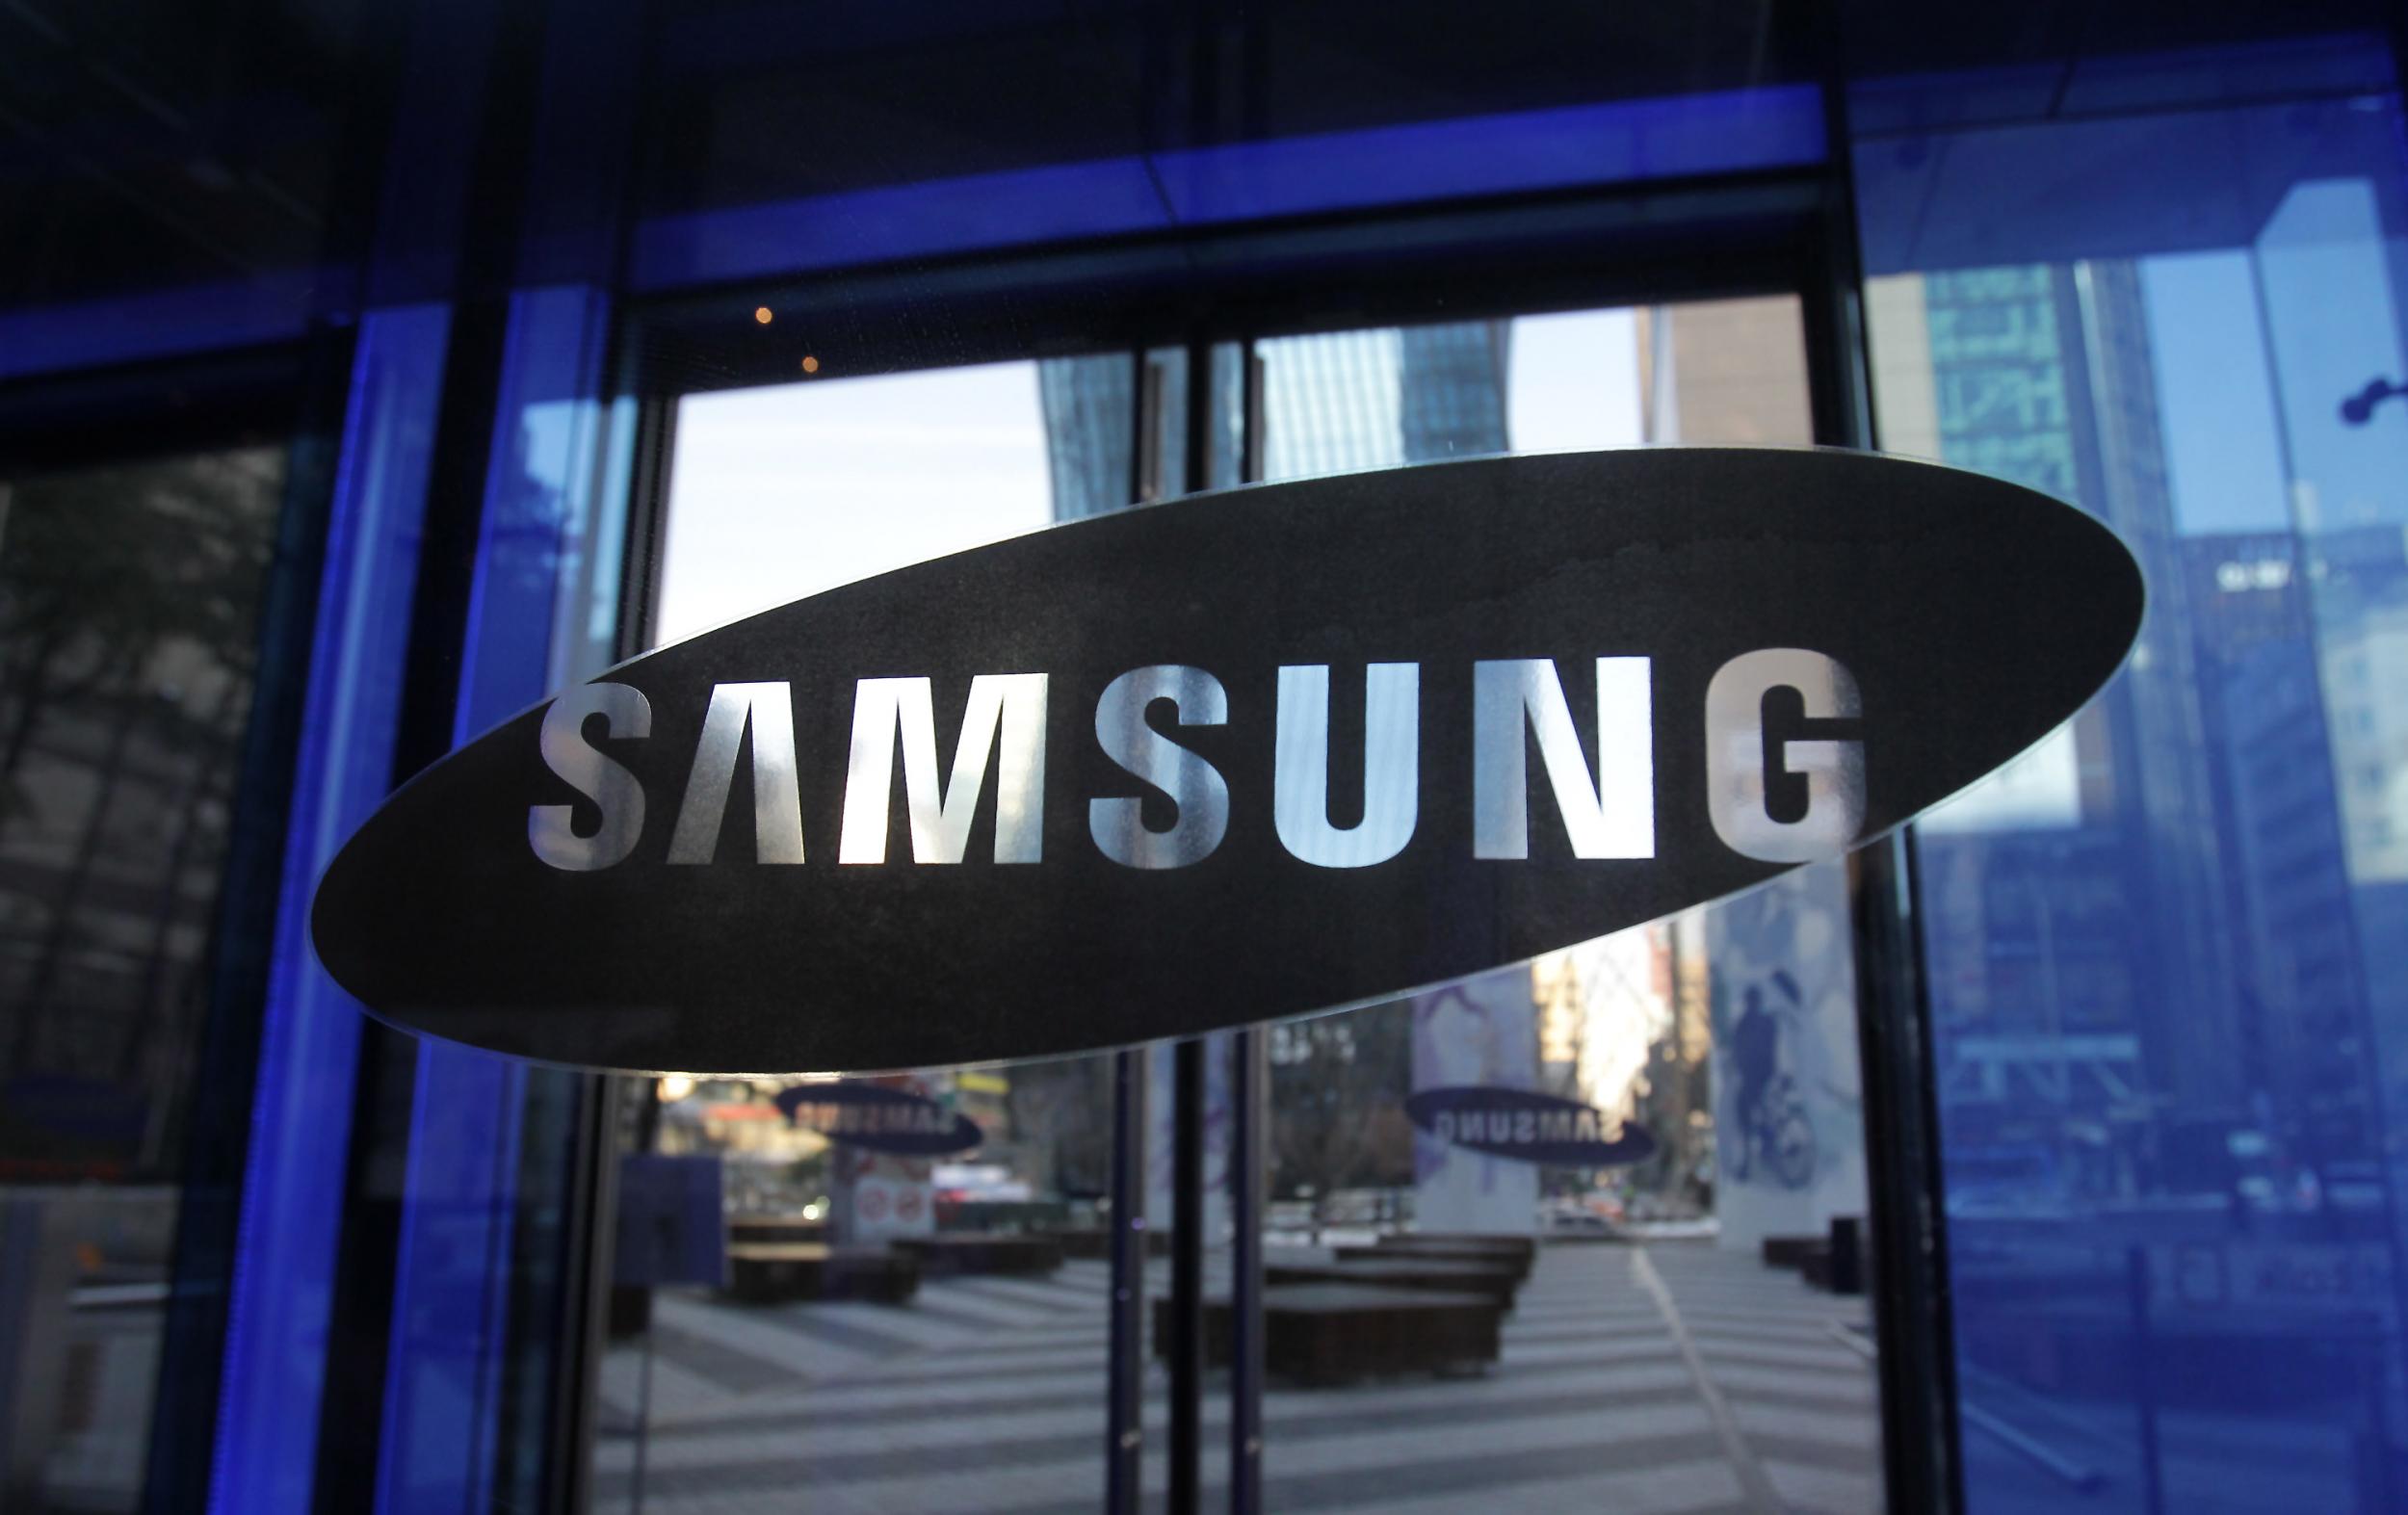 Samsung could get the jump on Apple with an earlier release